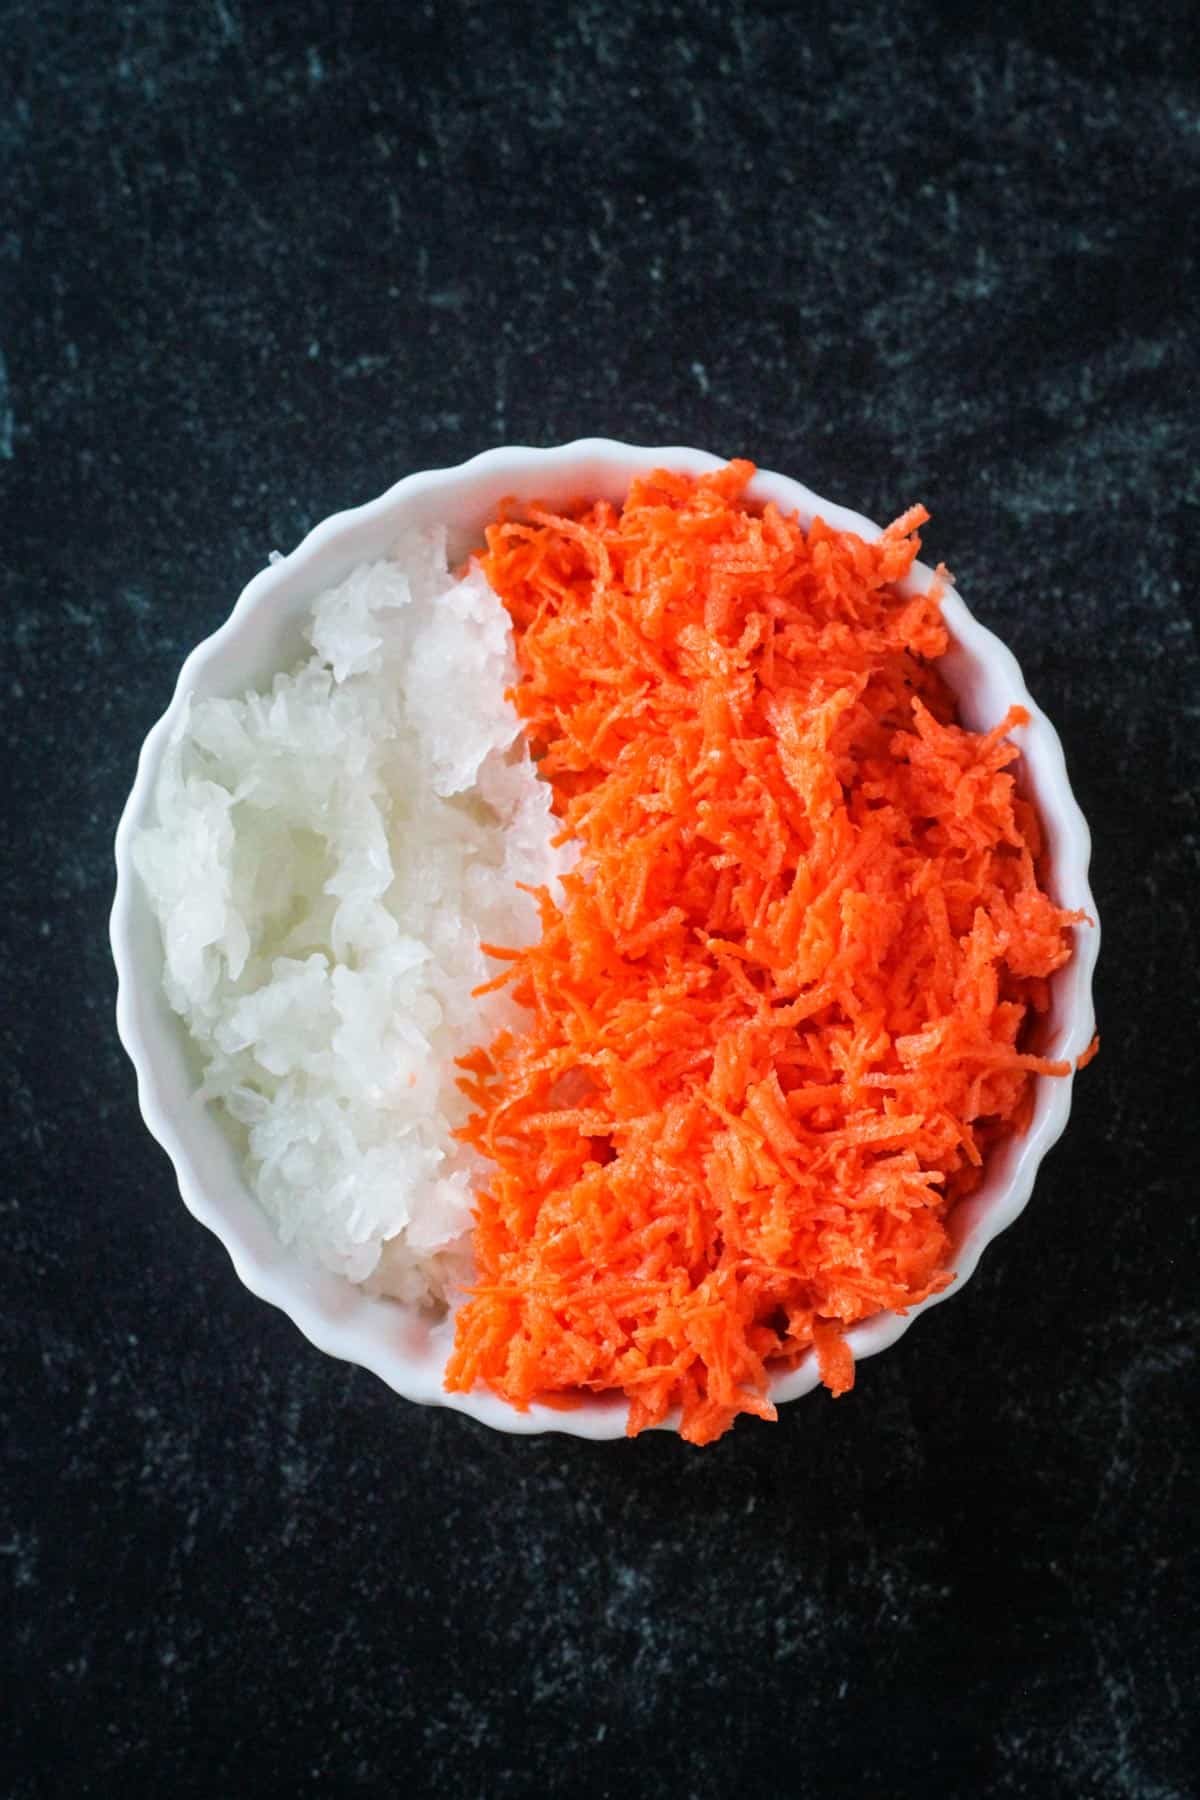 Shredded onions and carrots in a bowl.